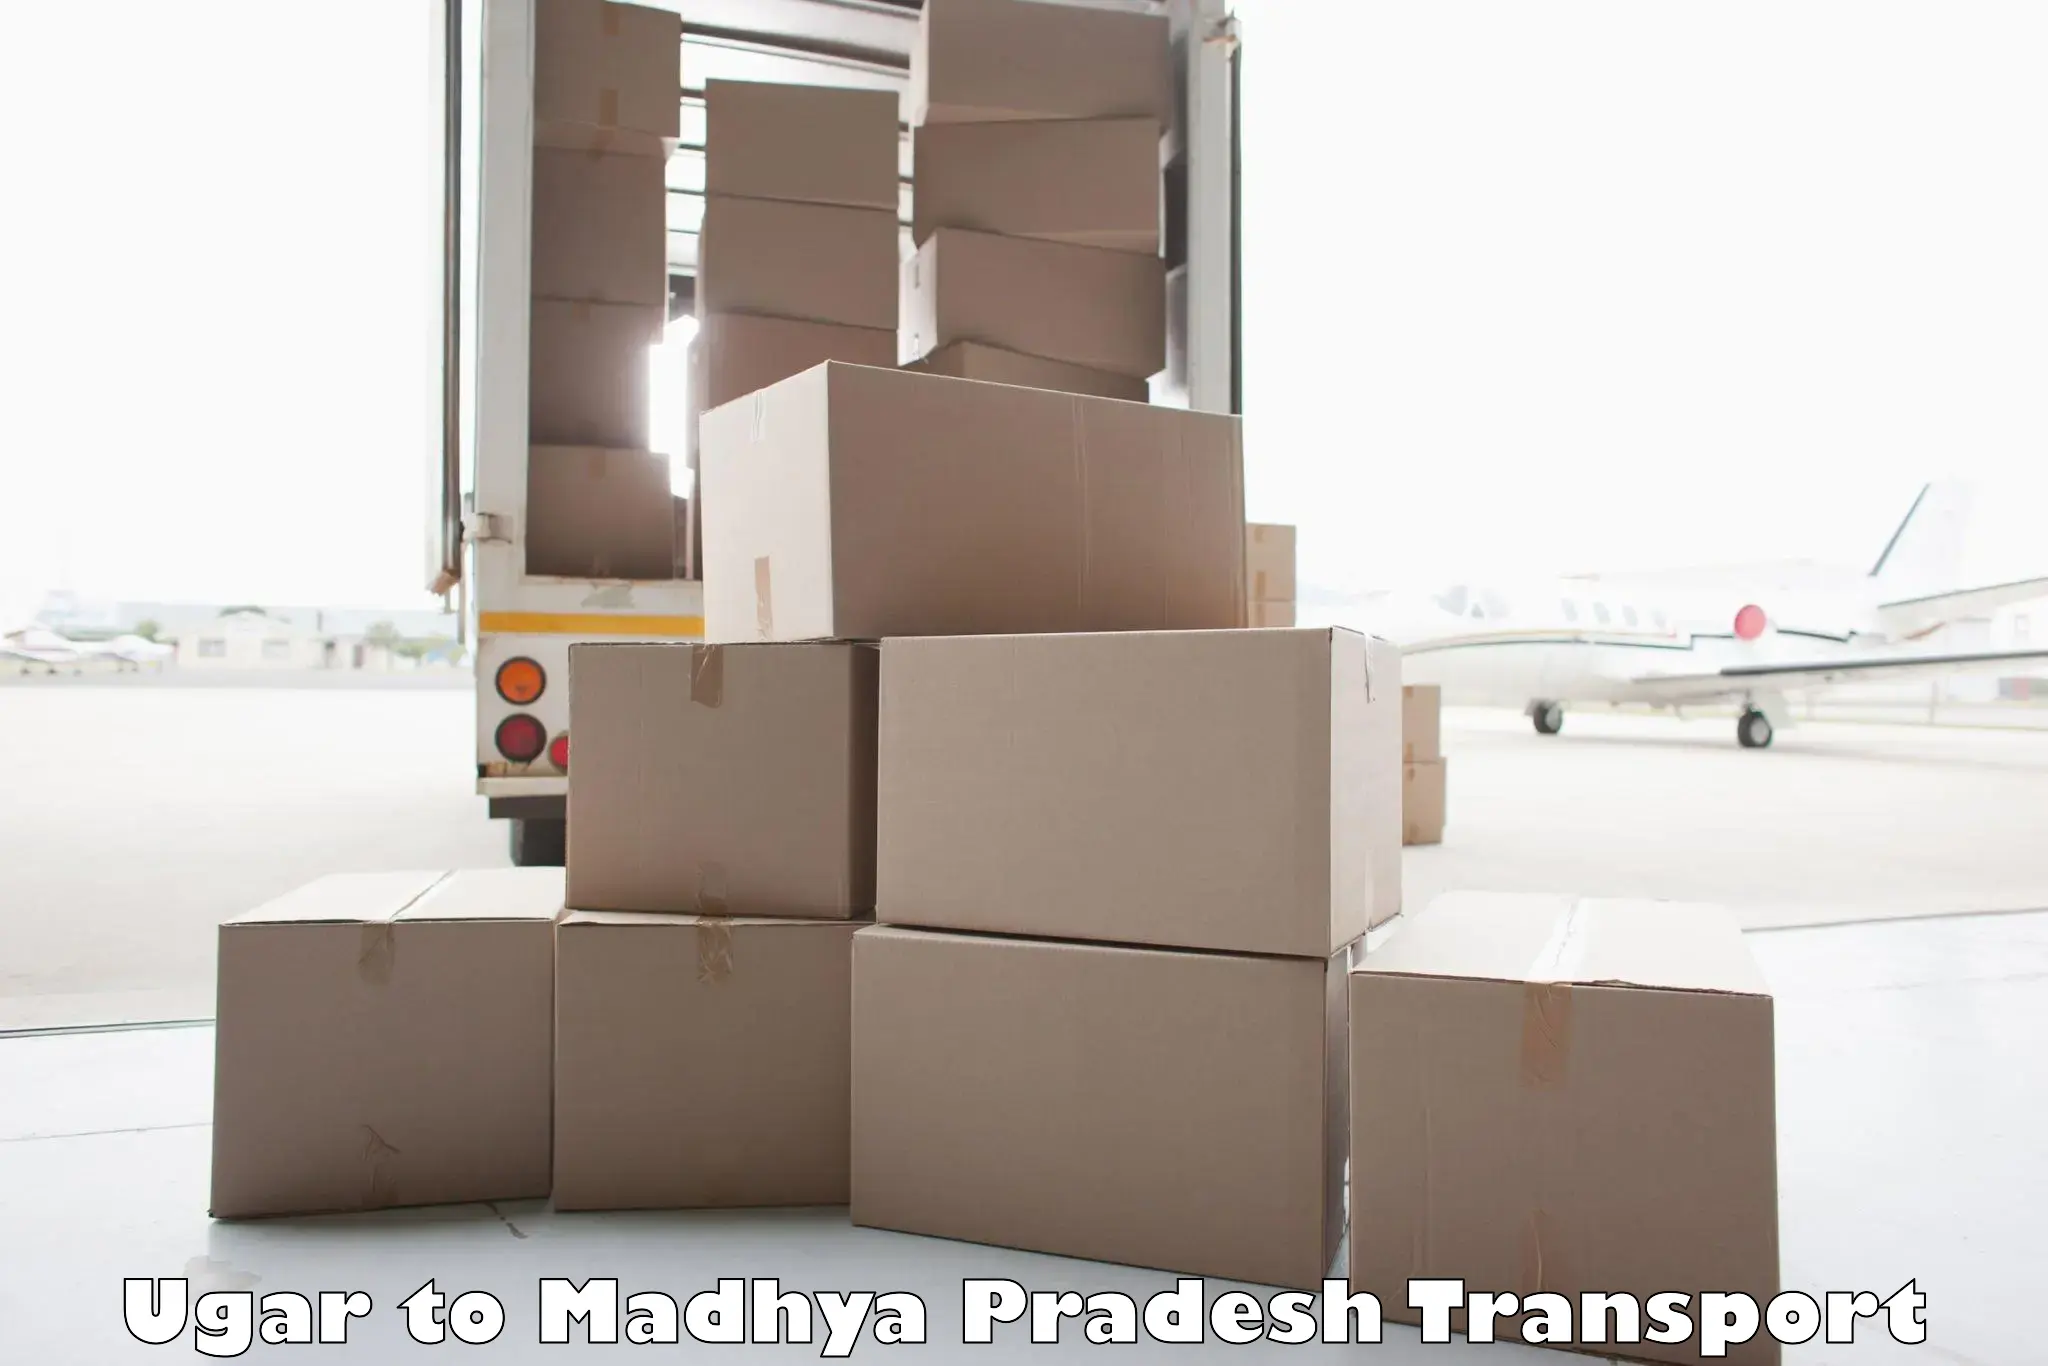 Truck transport companies in India in Ugar to Jawad Neemuch